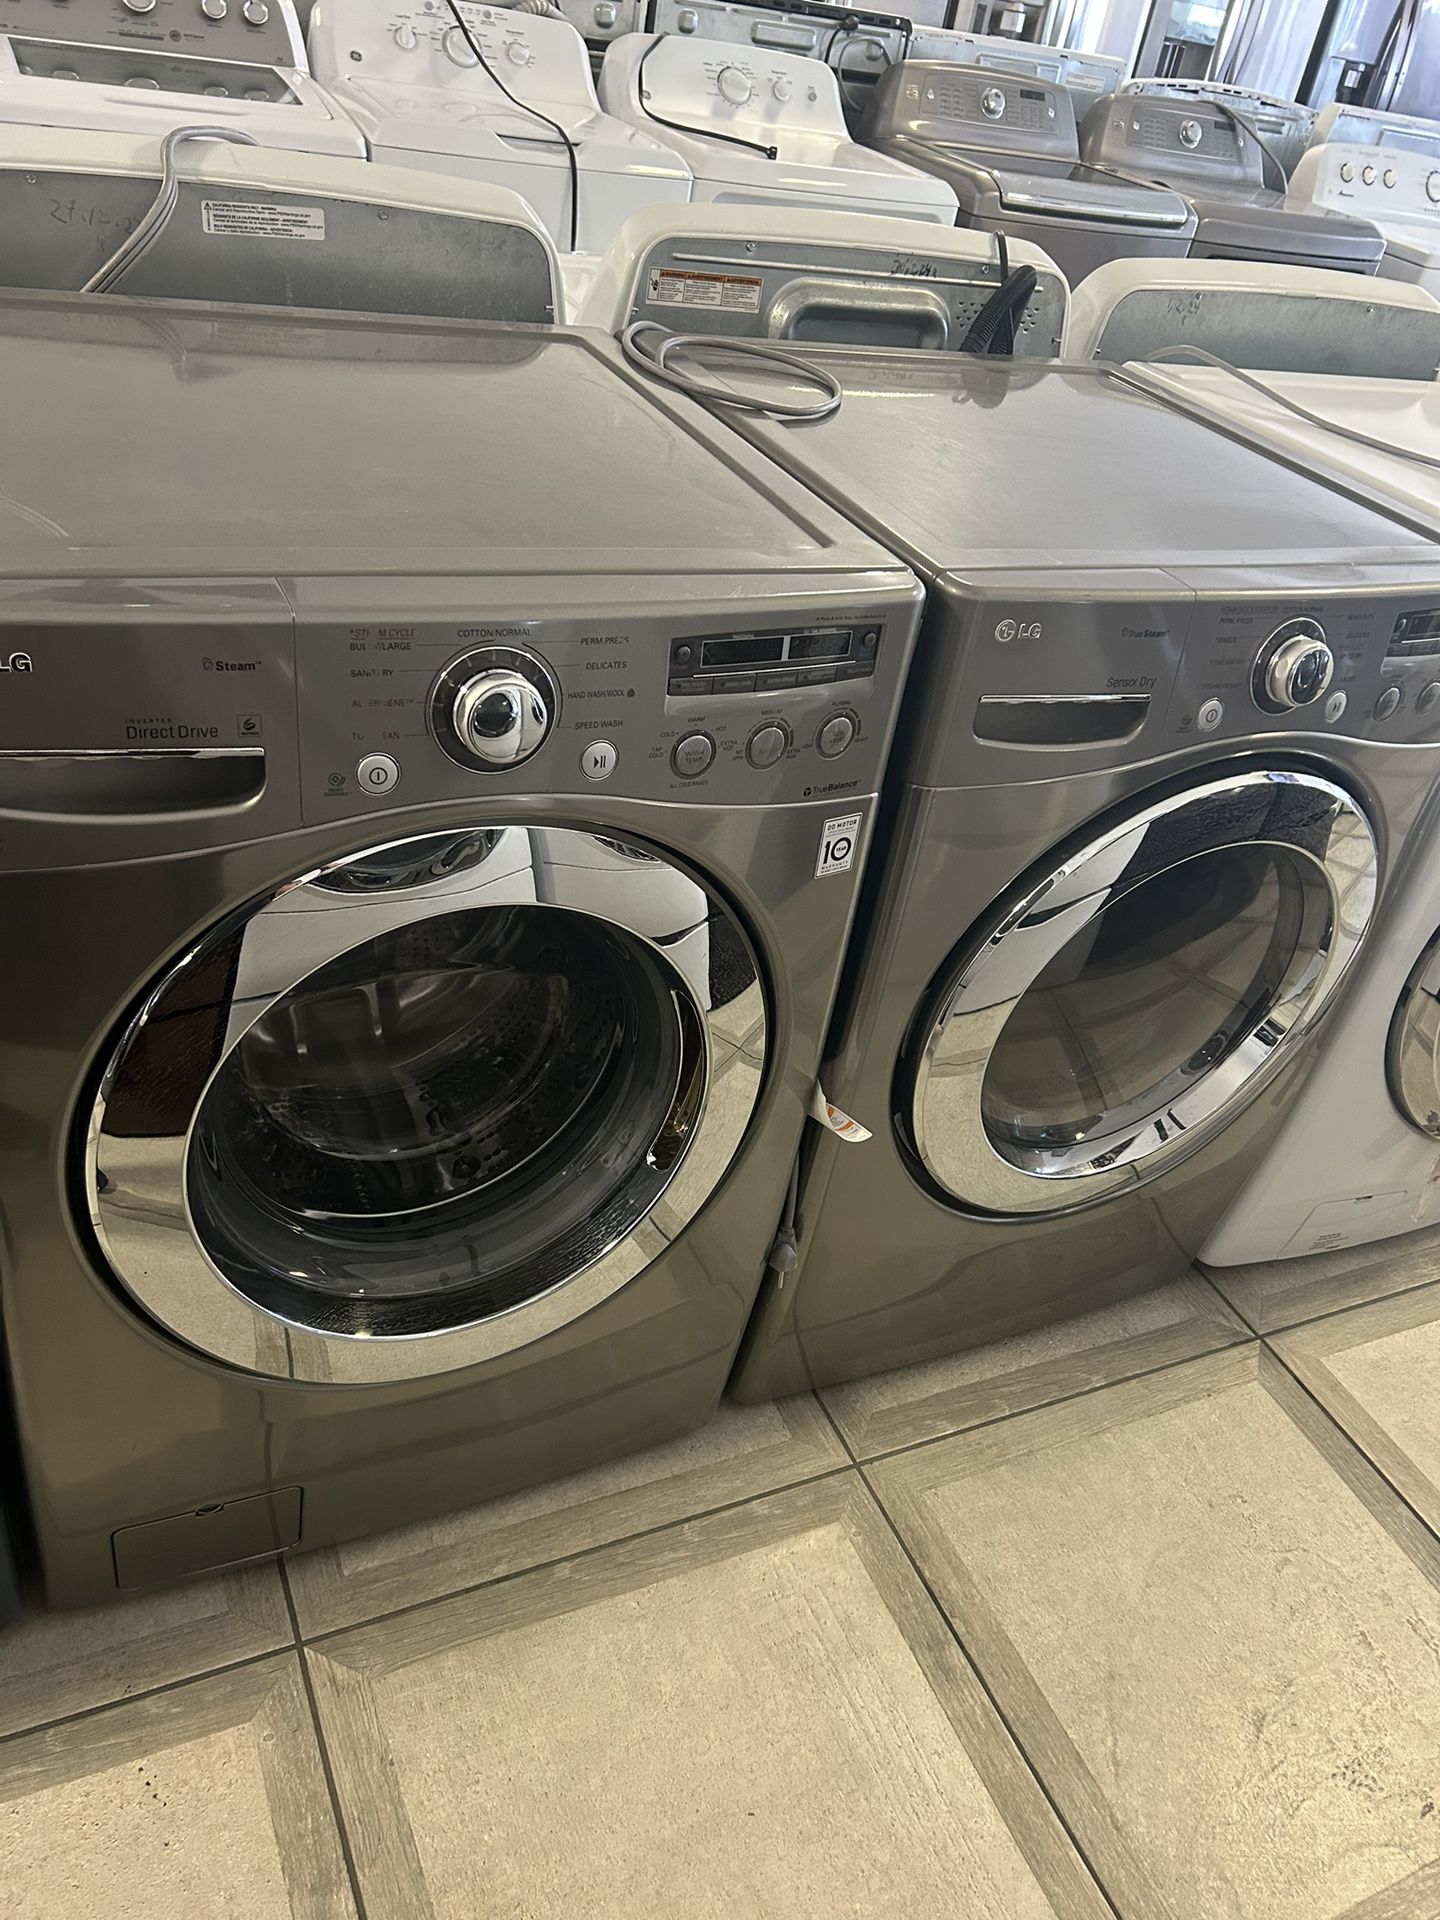 LG Washer And Gas Dryer Set